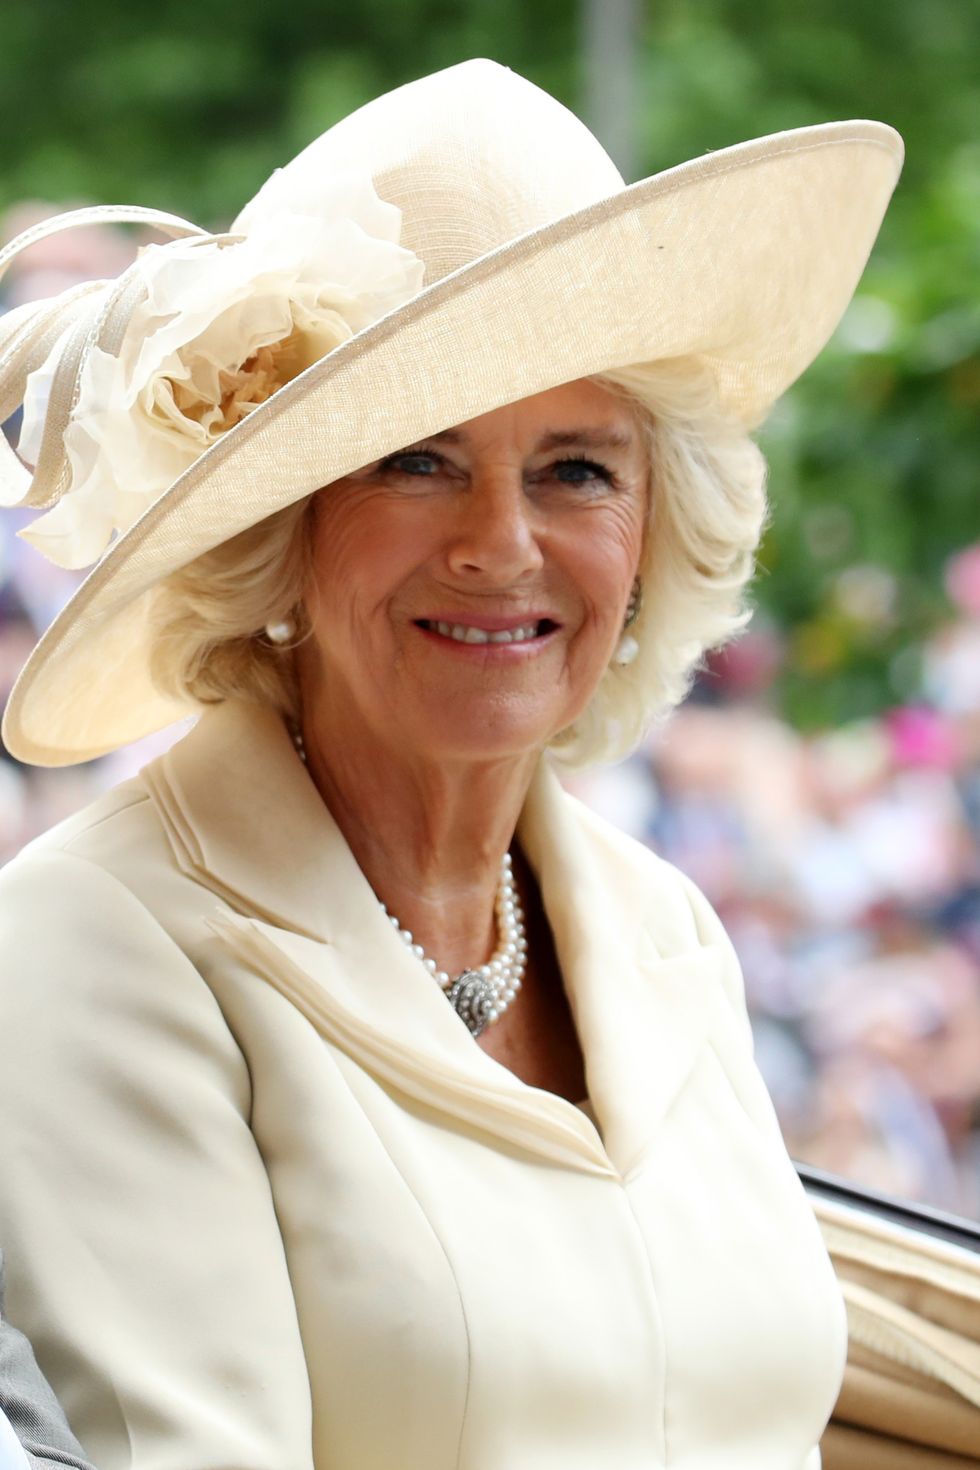 https://hips.hearstapps.com/hmg-prod.s3.amazonaws.com/images/hbz-royal-ascot-hats-camilla-duchess-of-cornwall-gettyimages-978637880-1529432623.jpg?crop=1xw:1xh;center,top&resize=980:*